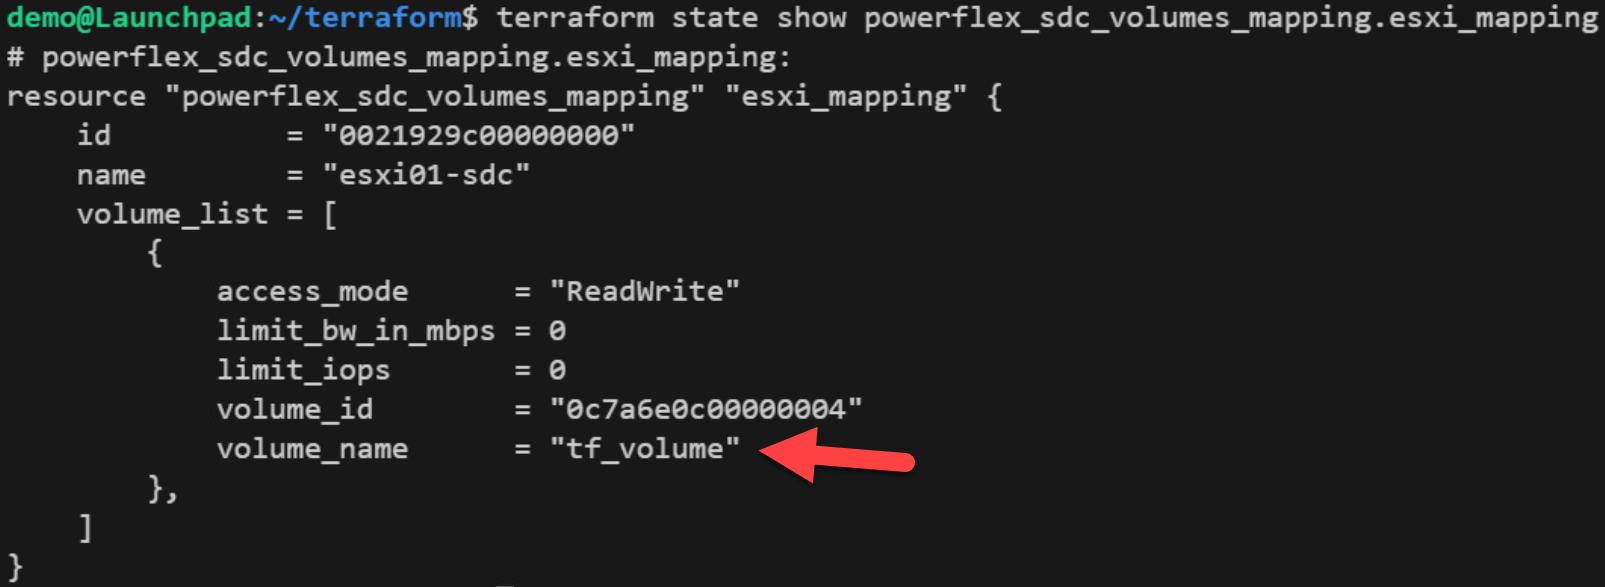 Showing the terraform apply with configuration results only showing the new volume and not the existing volume